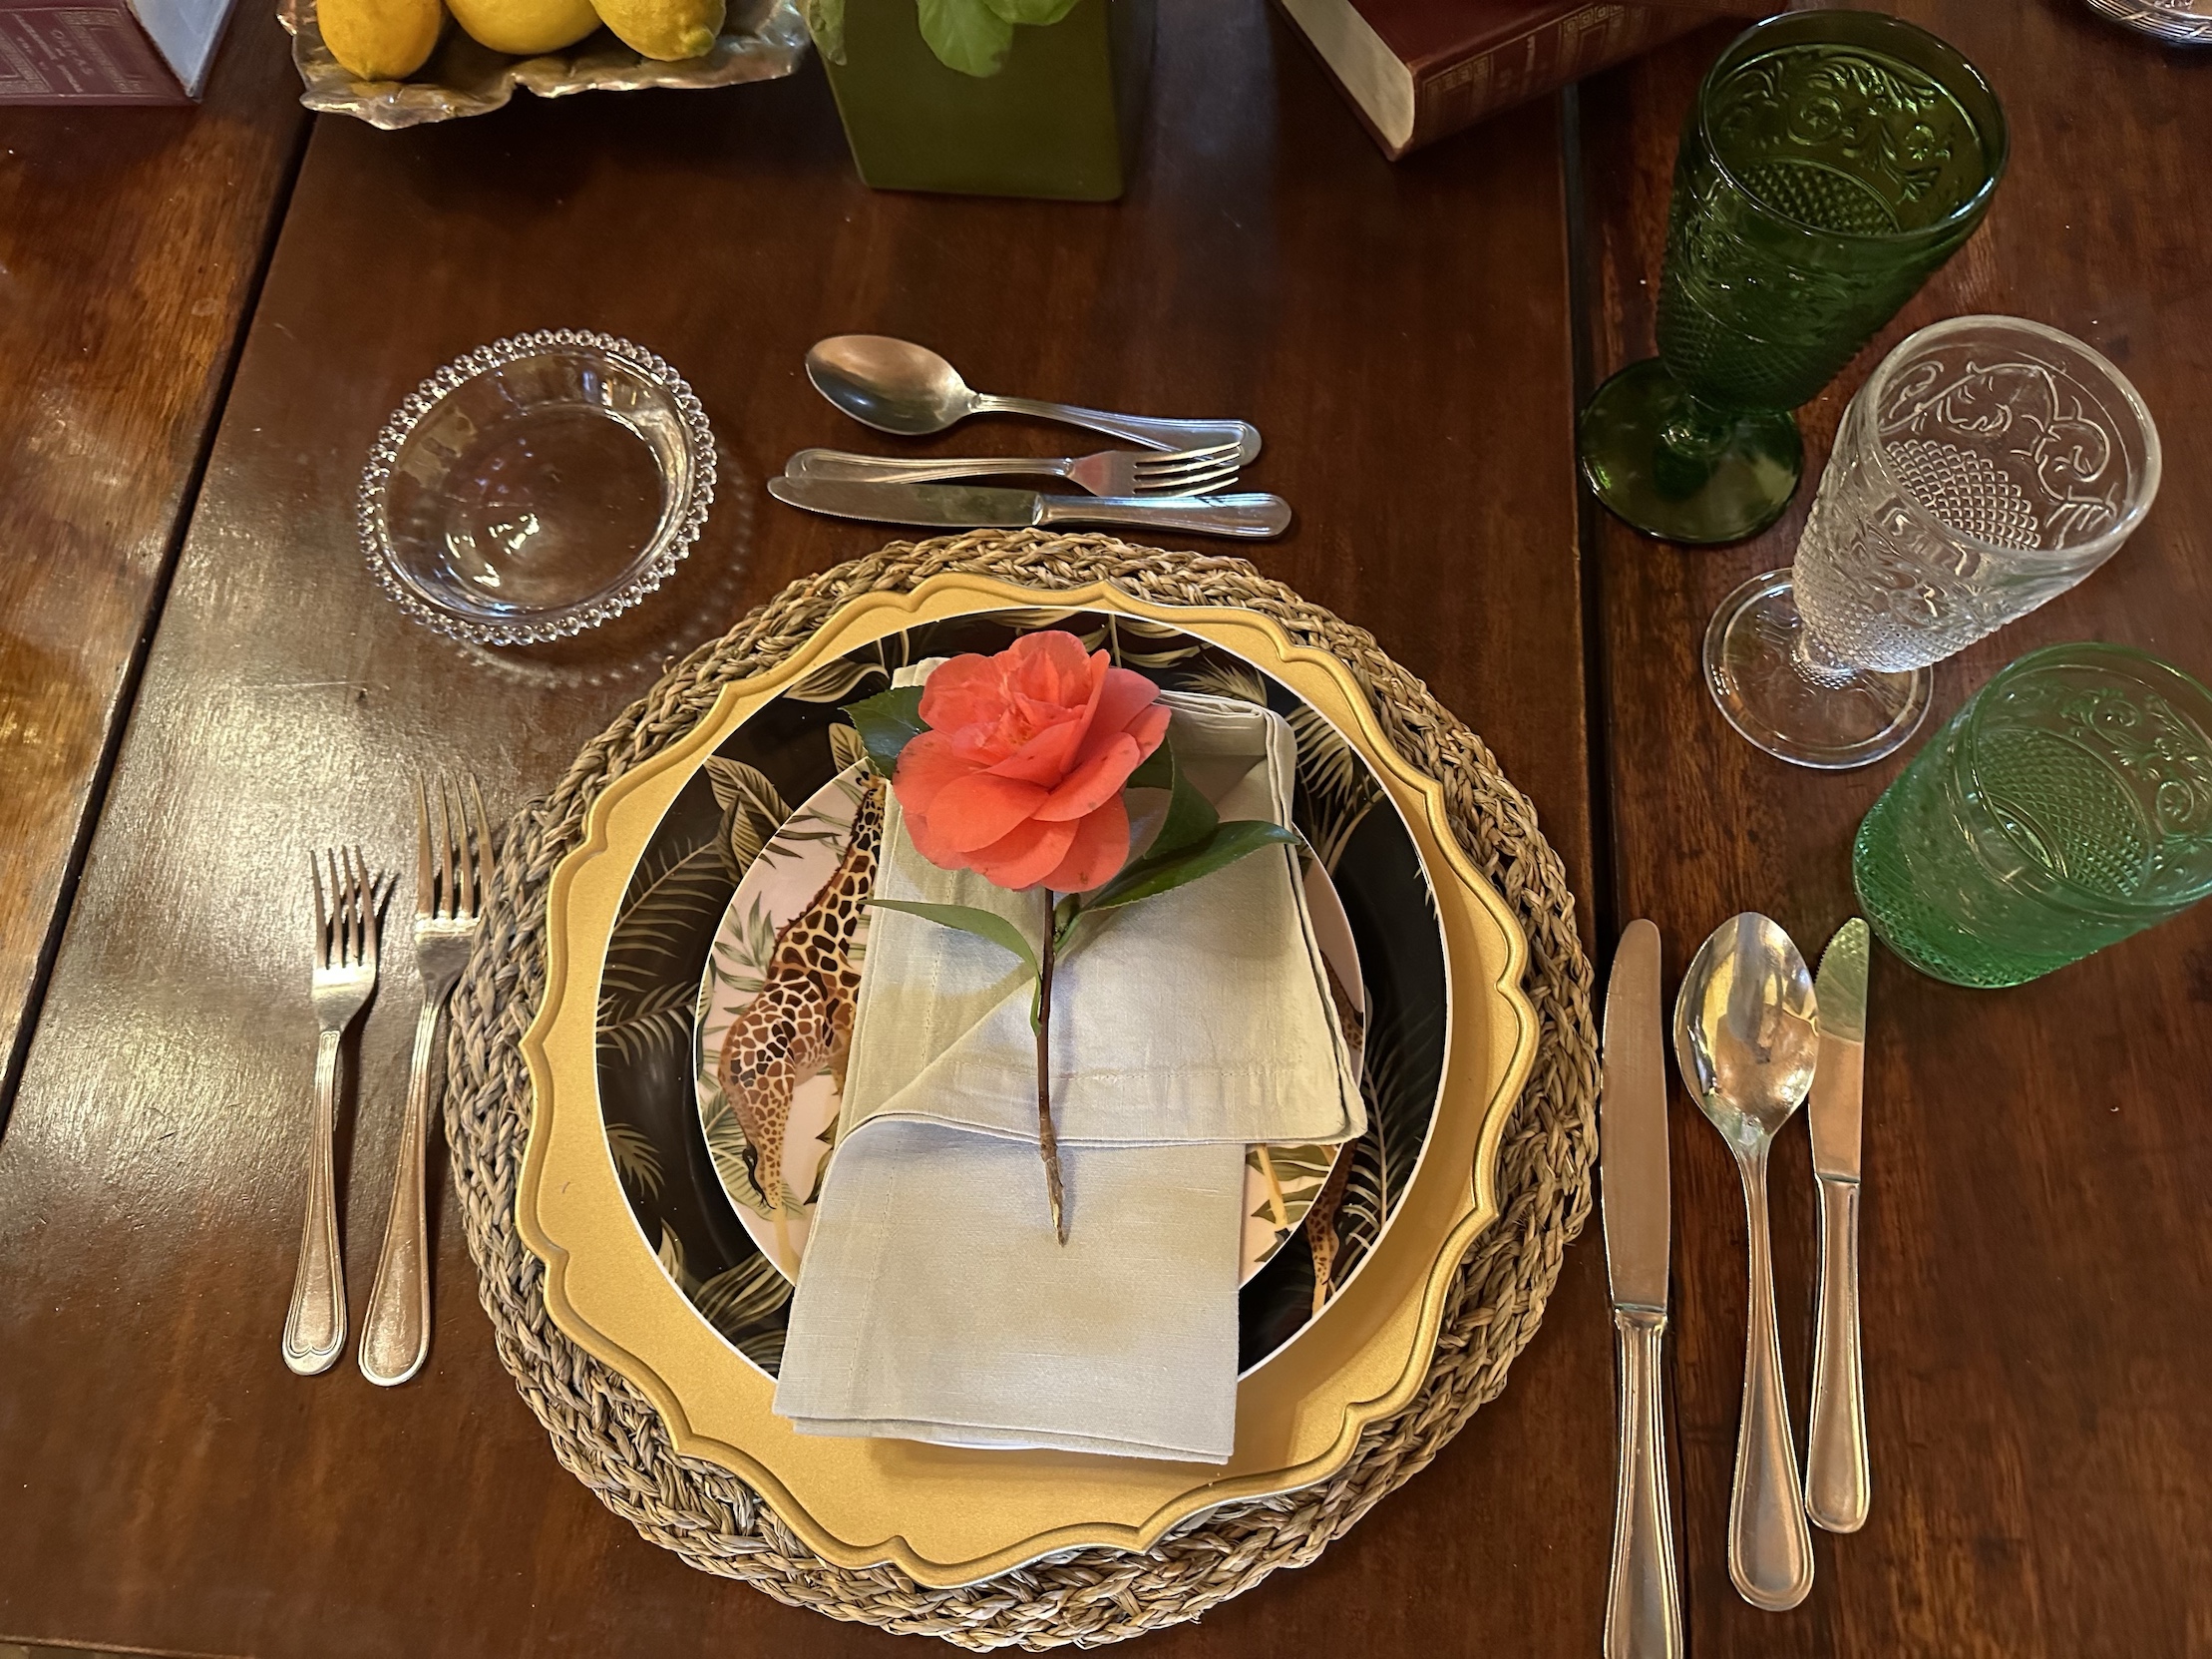 Place setting at the countess home